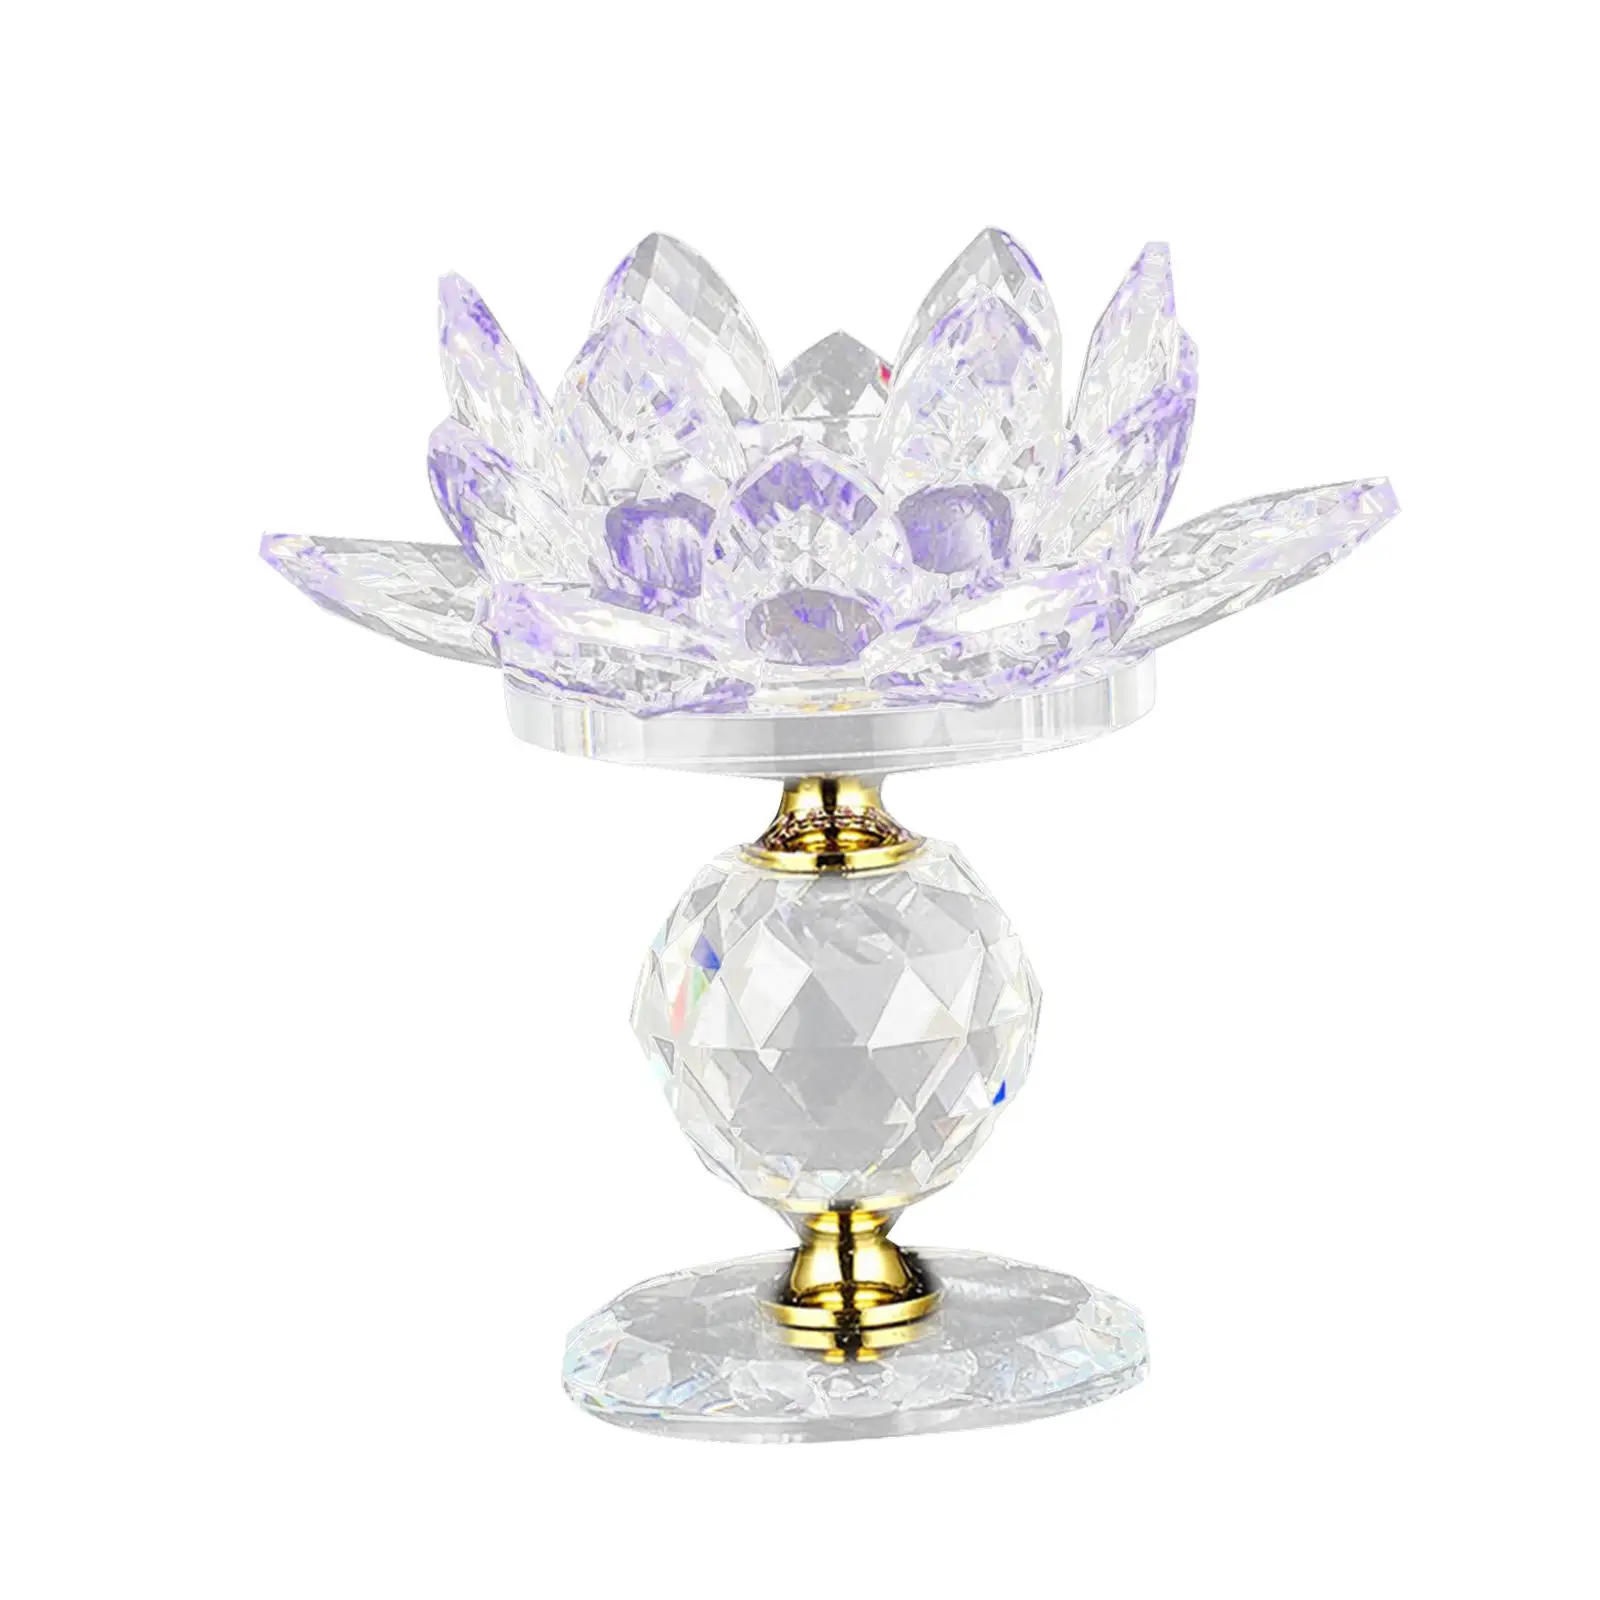 Crystal Glass Lotus Candle Holders for Home Decoration Votive Tealight Holders Wedding Gift